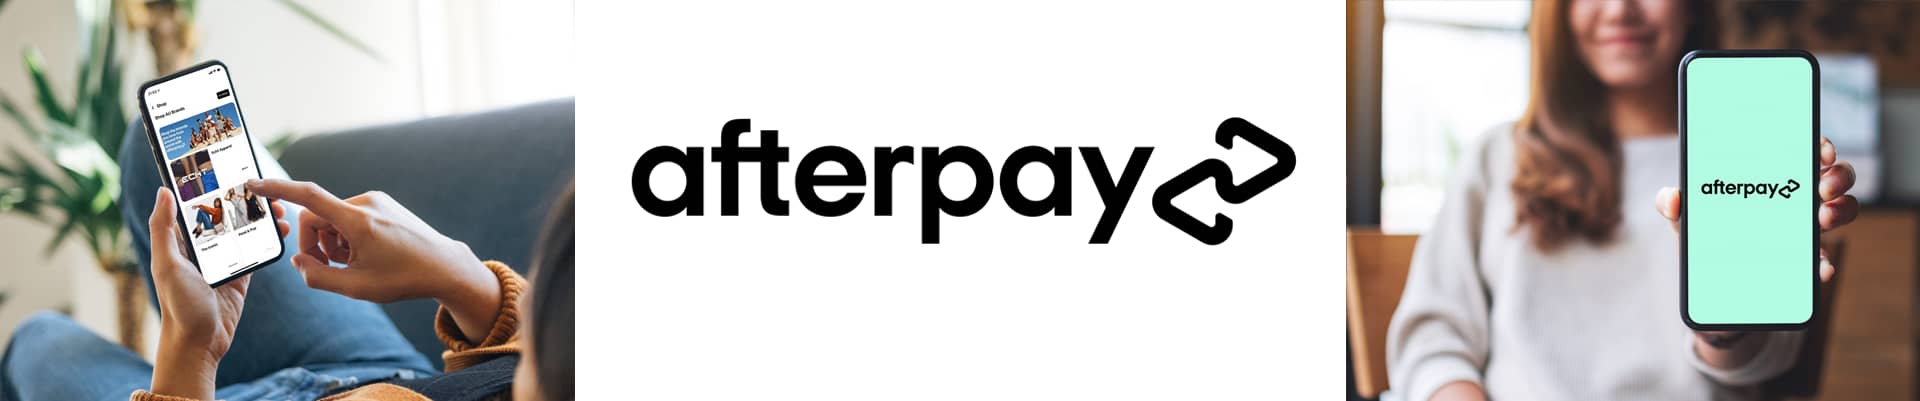 pay for flights with afterpay